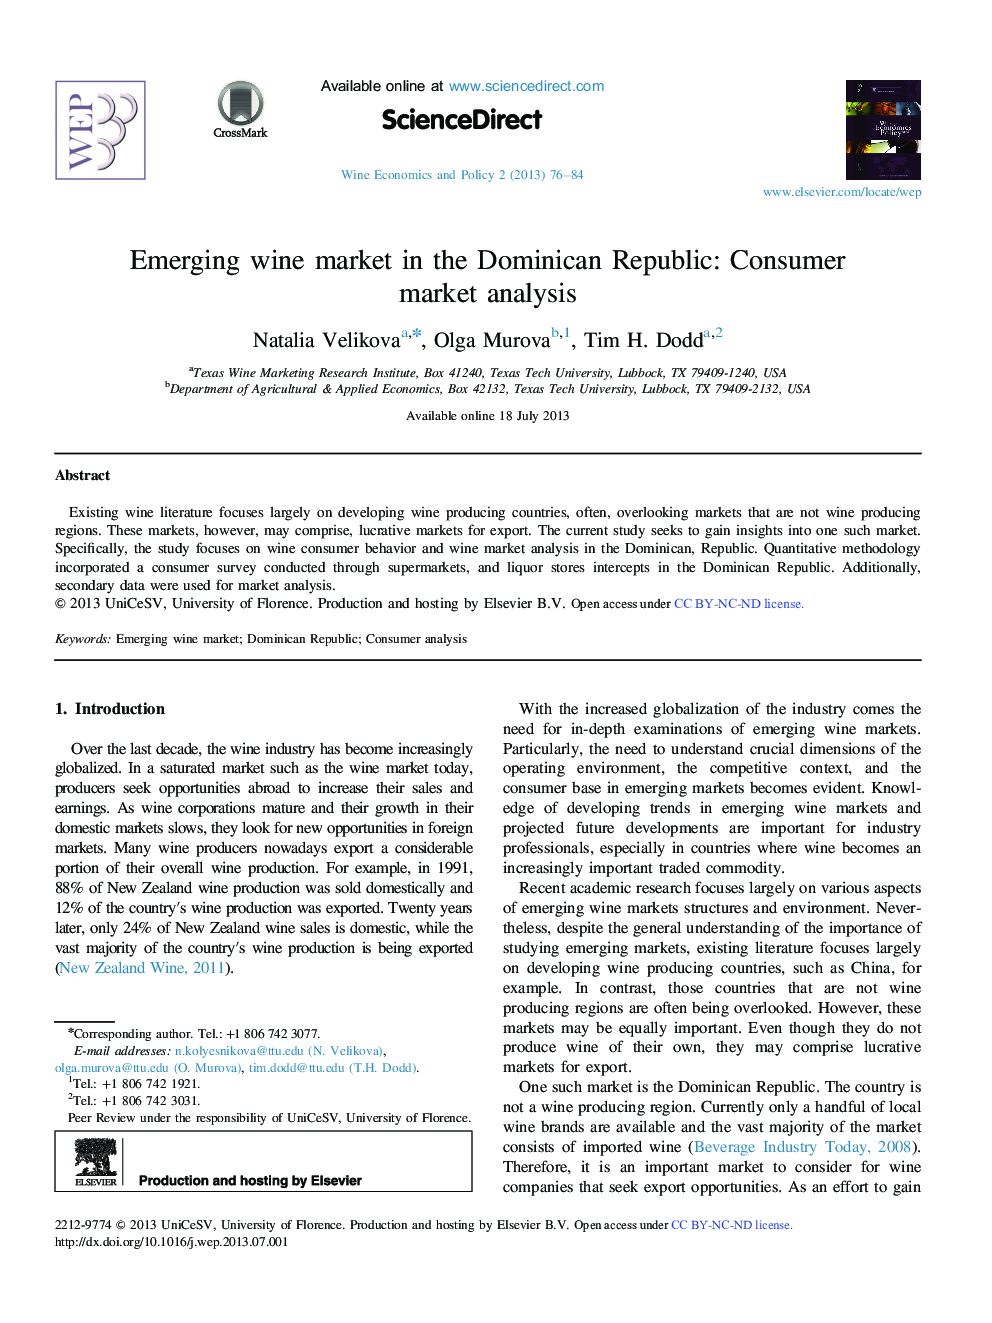 Emerging wine market in the Dominican Republic: Consumer market analysis 